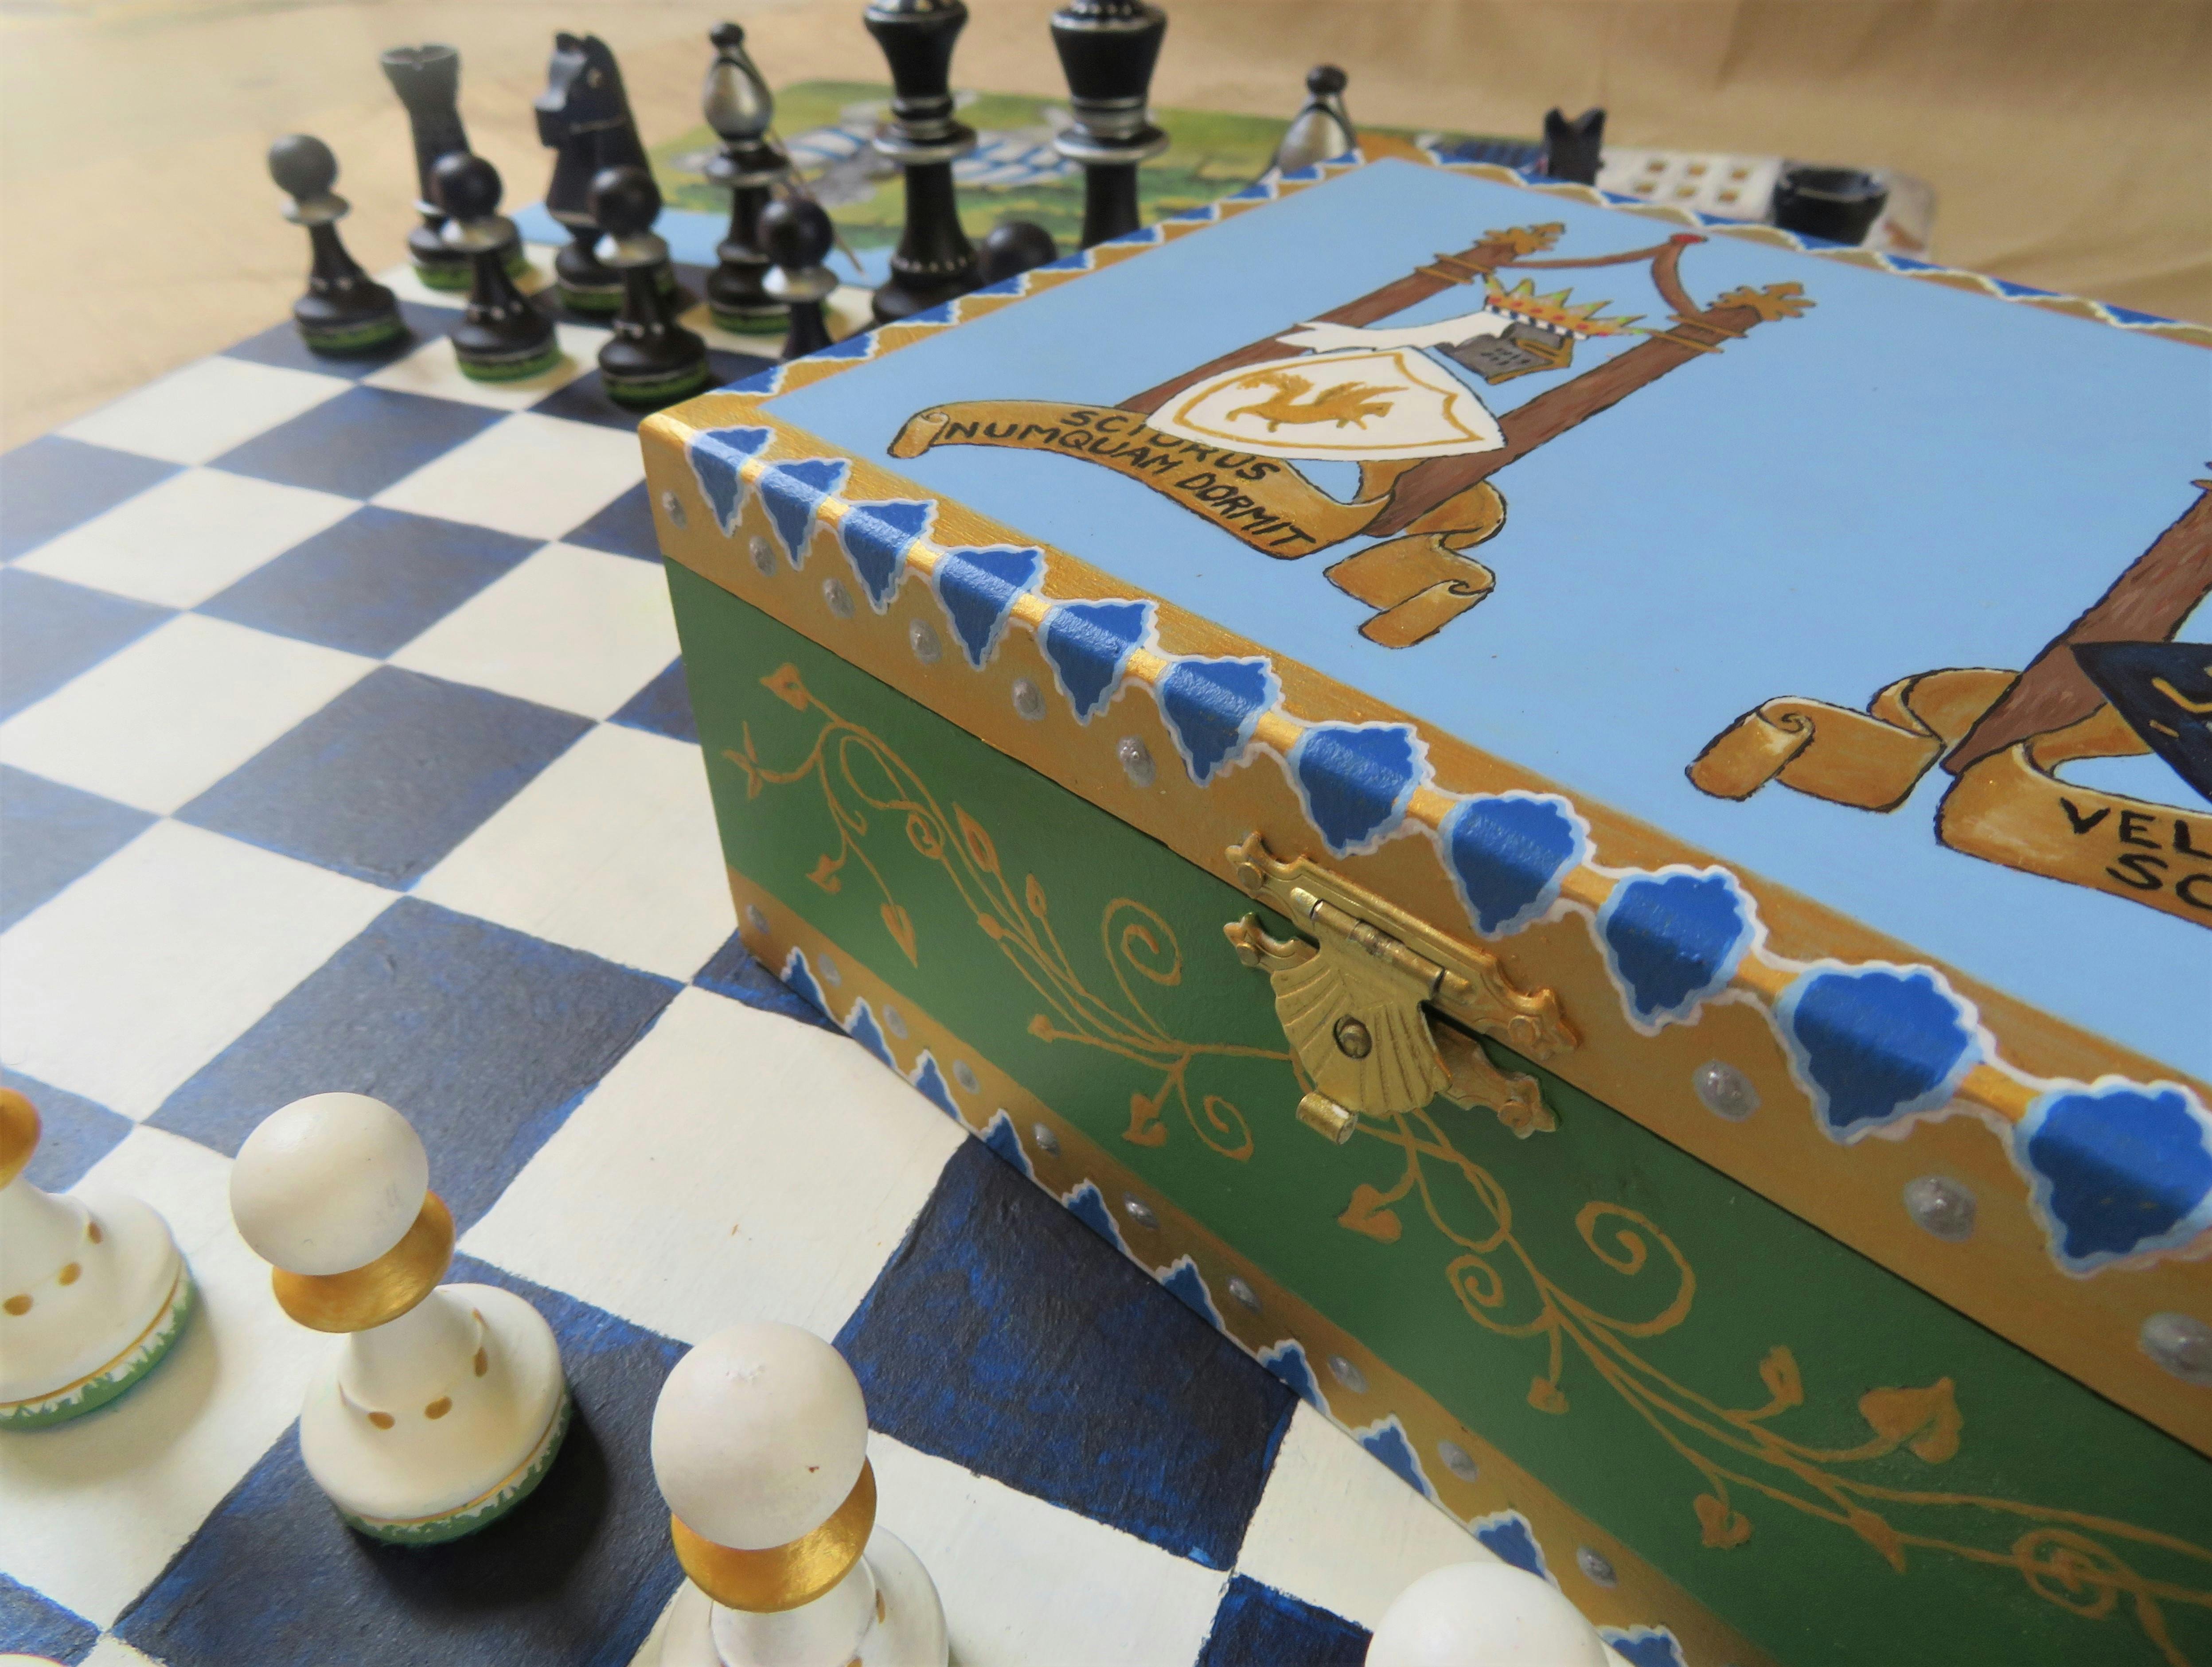 Project, Automatic Chessboard